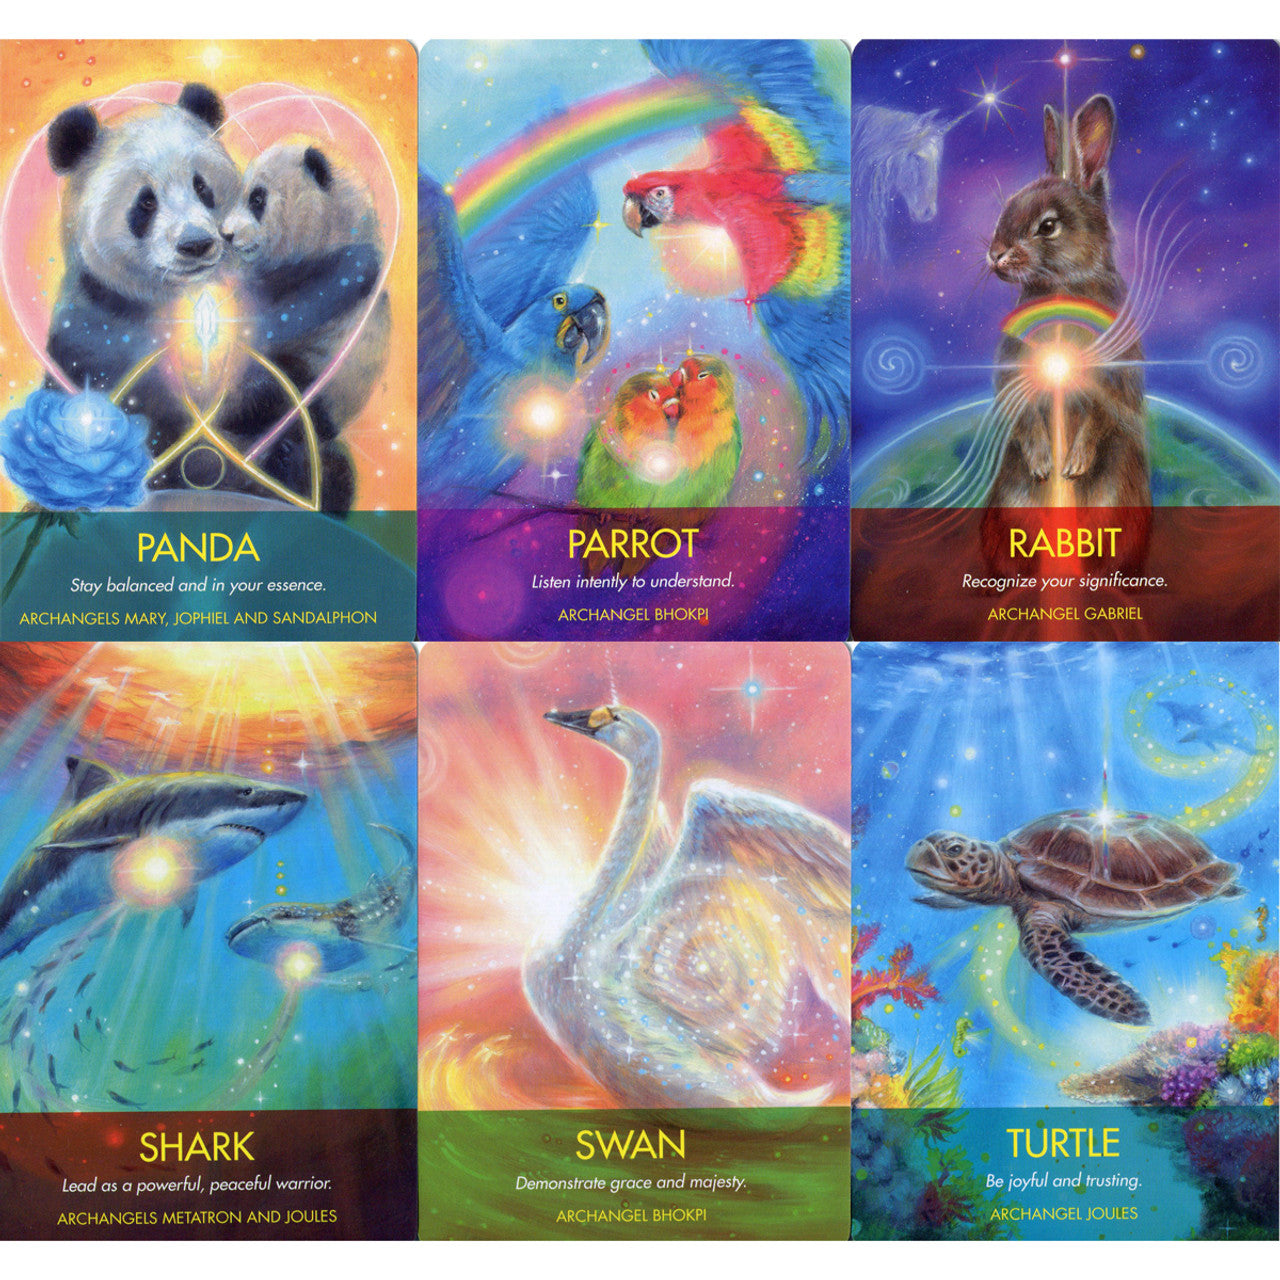 Archangel Animal Oracle Cards - Wicked Witcheries